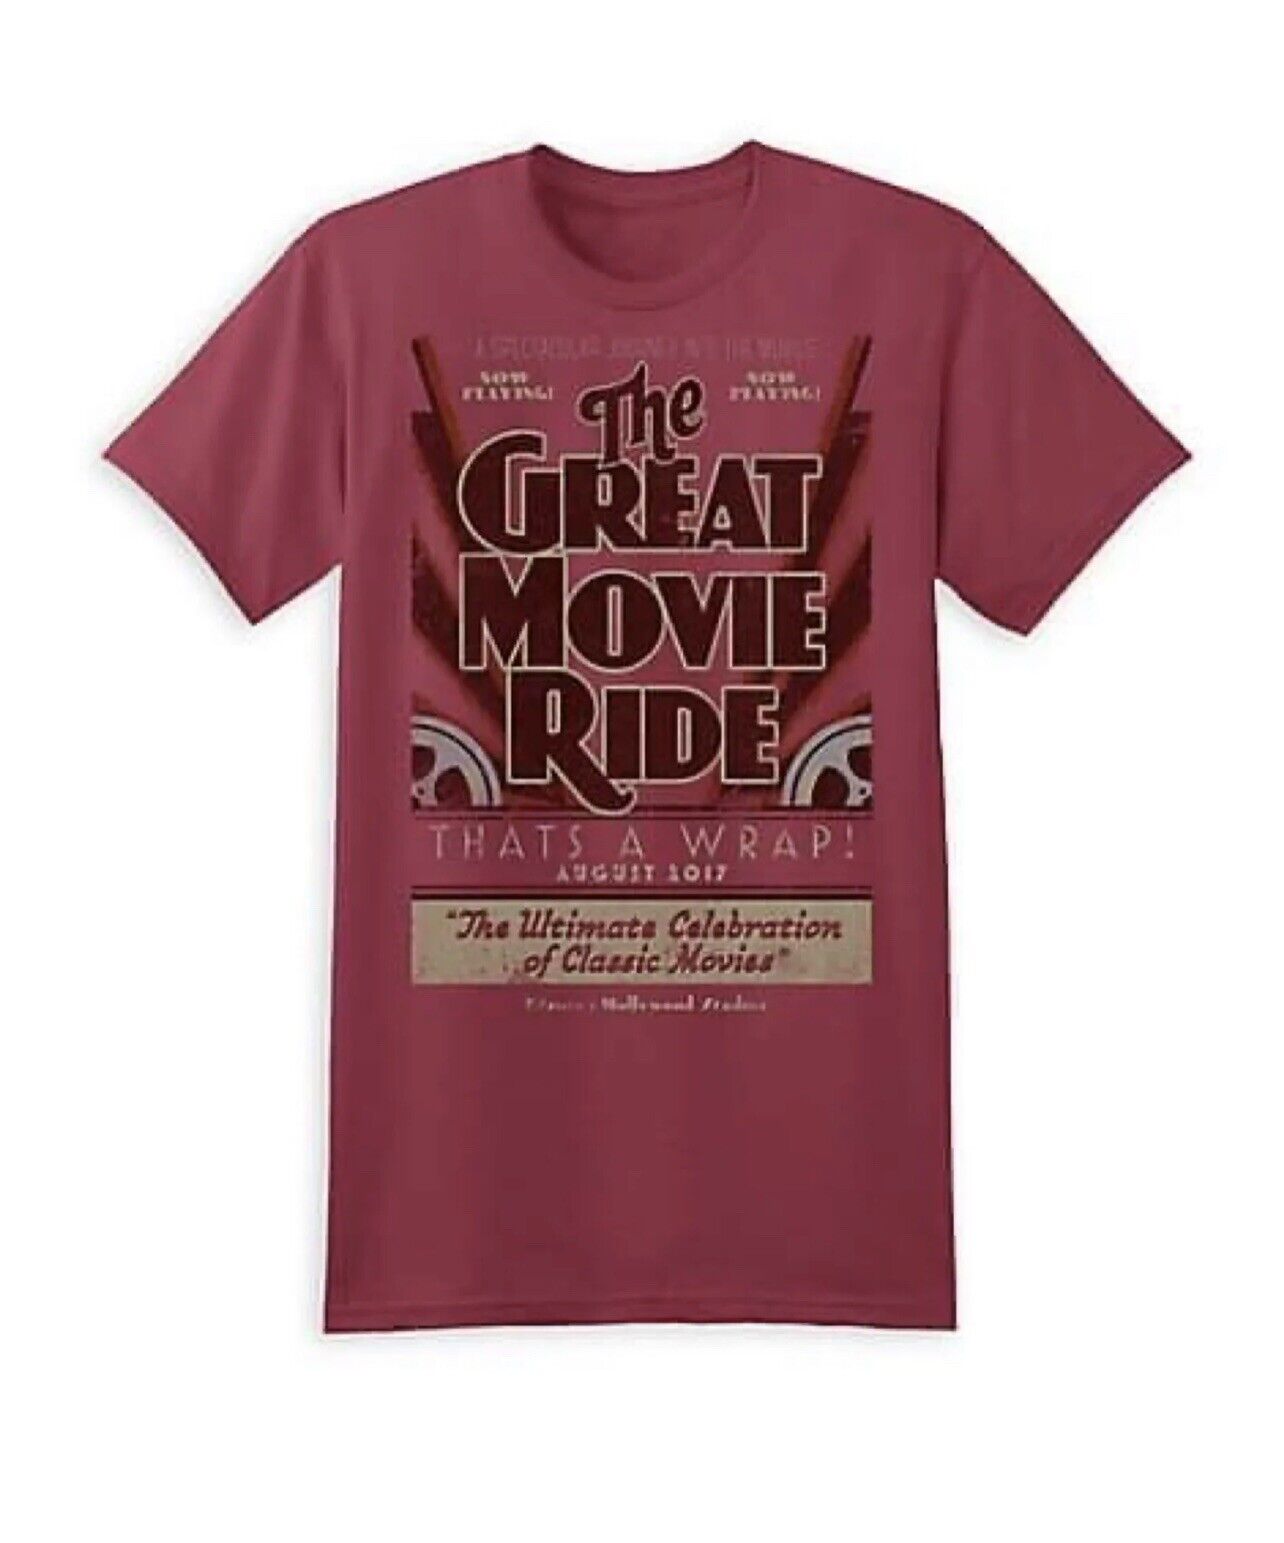 XL Disney Hollywood Studios Shirt The Great Movie Ride Tee THATS A WRAP 2017 RED